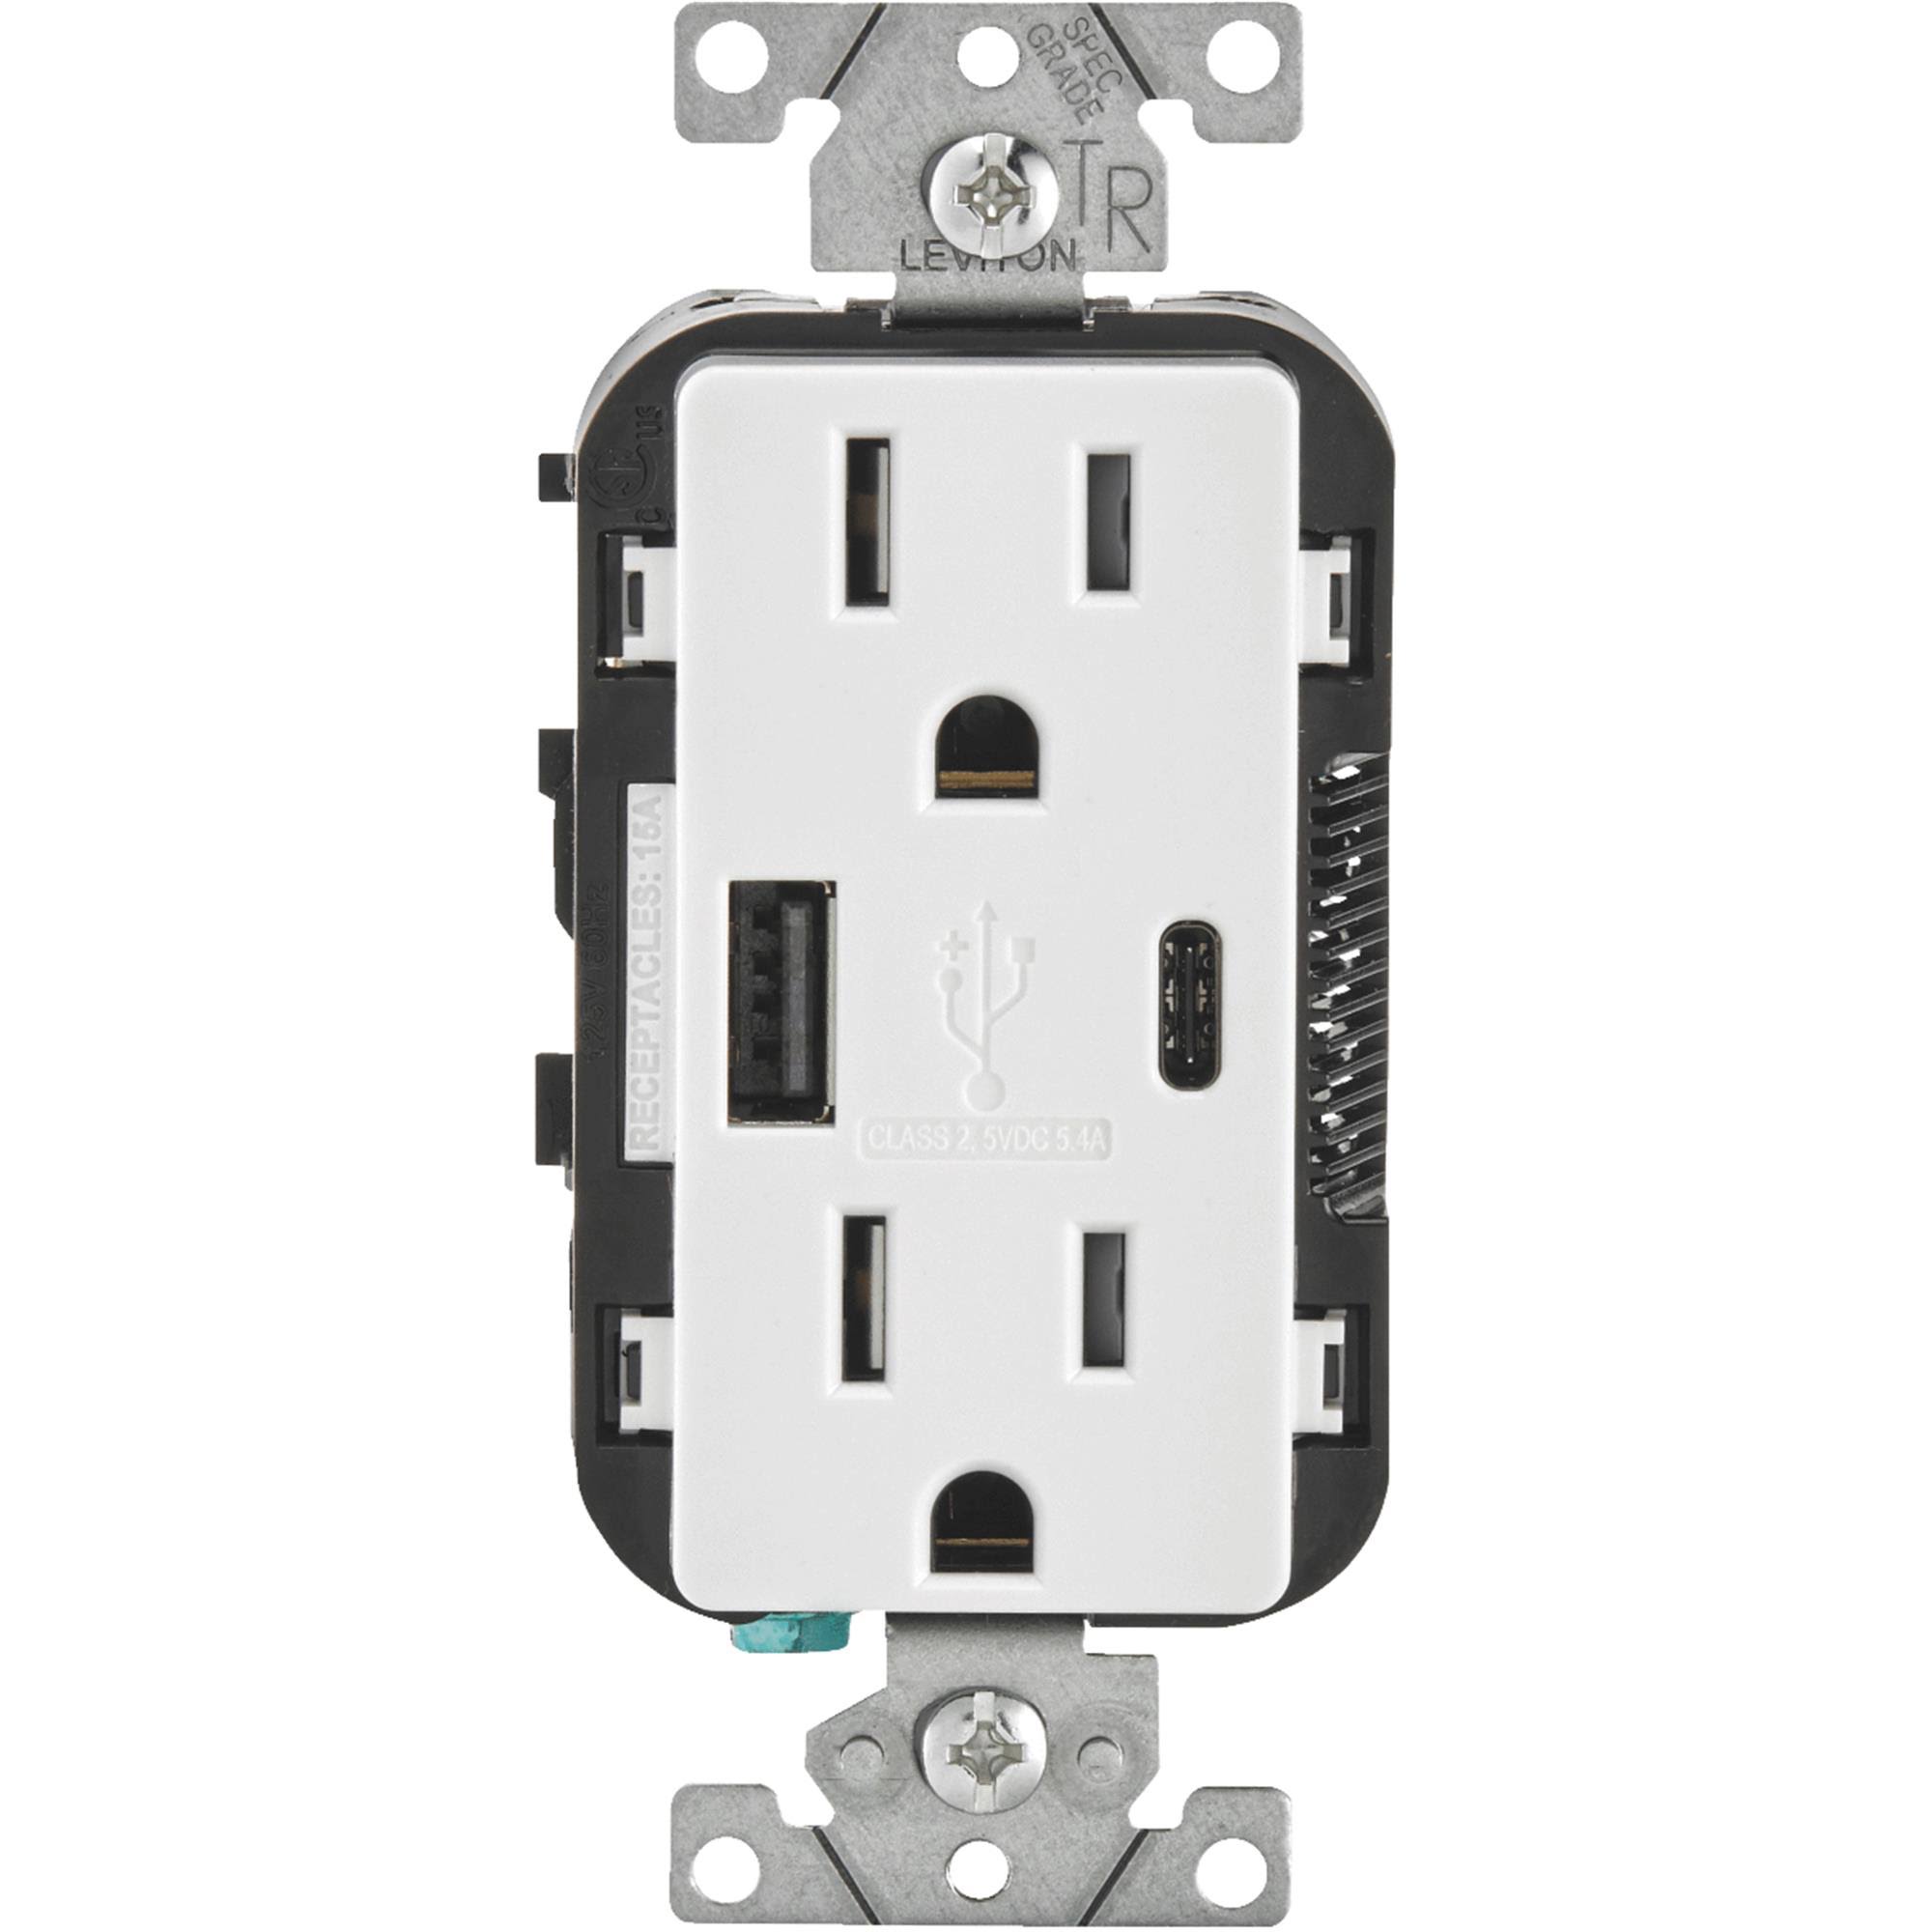 Leviton Decora Type A and C USB Charger Tamper Resistant Outlet - White, 15 Amp